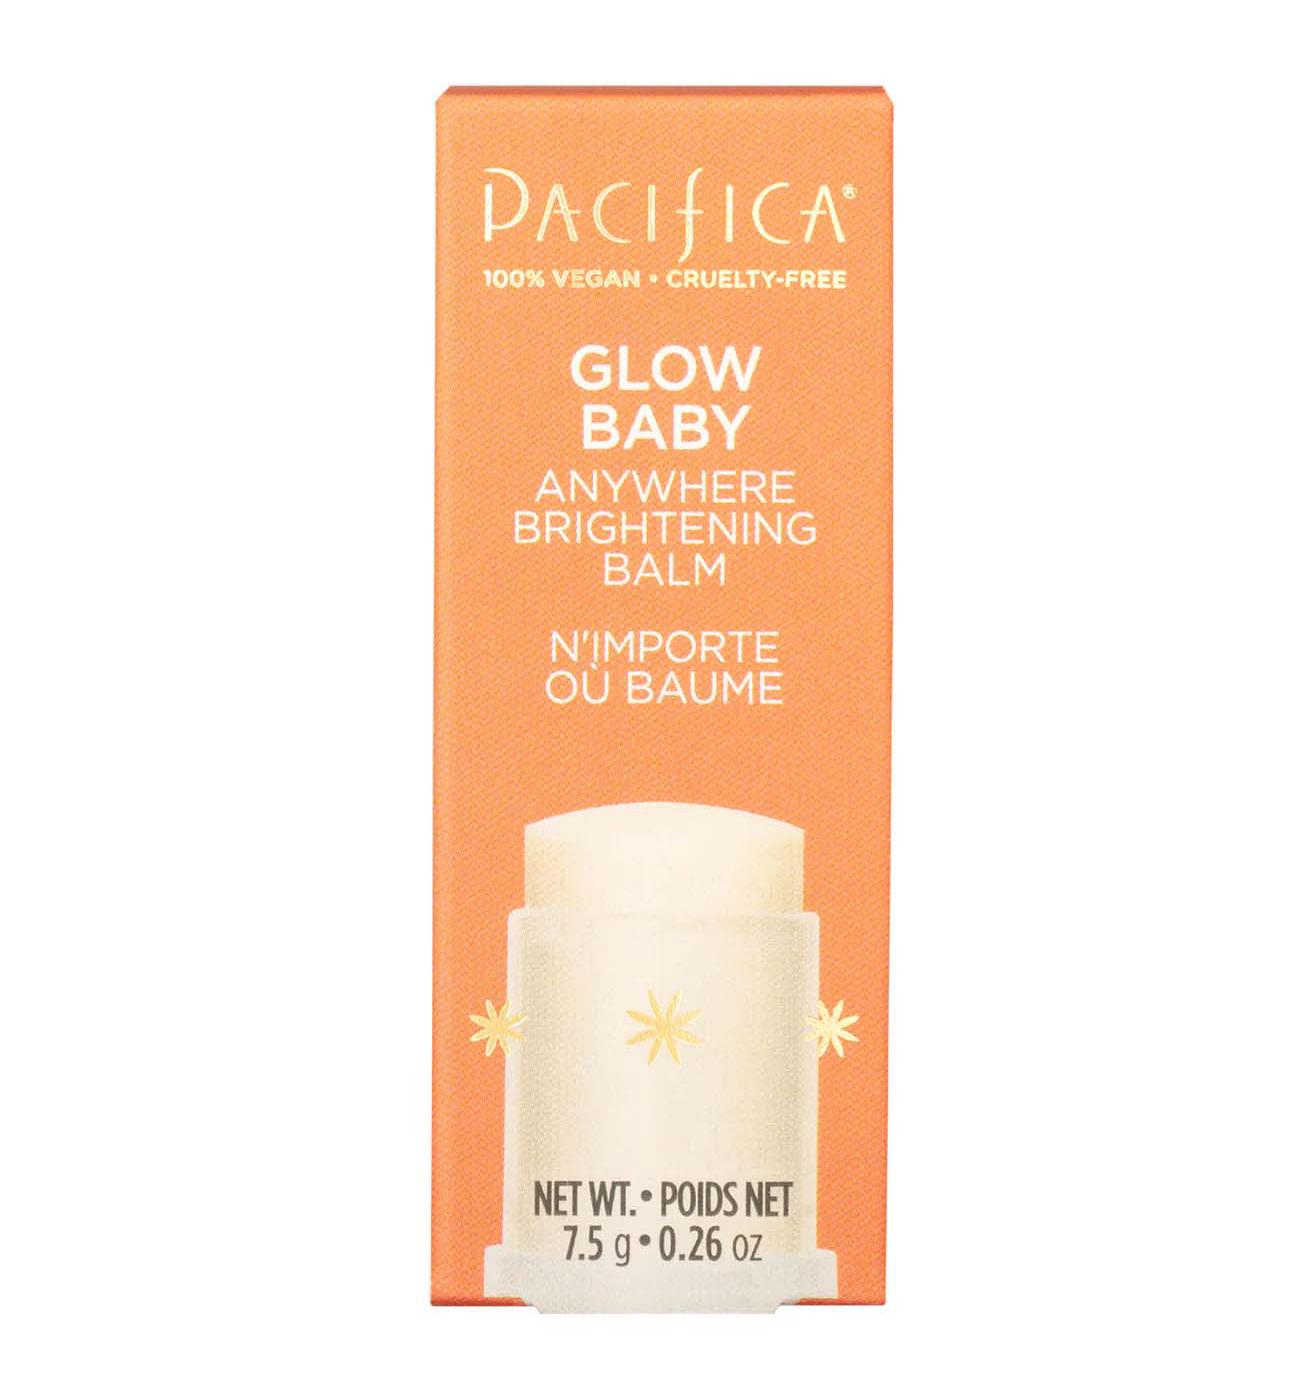 Pacifica Glow Baby Anywhere Brightening Balm; image 1 of 5